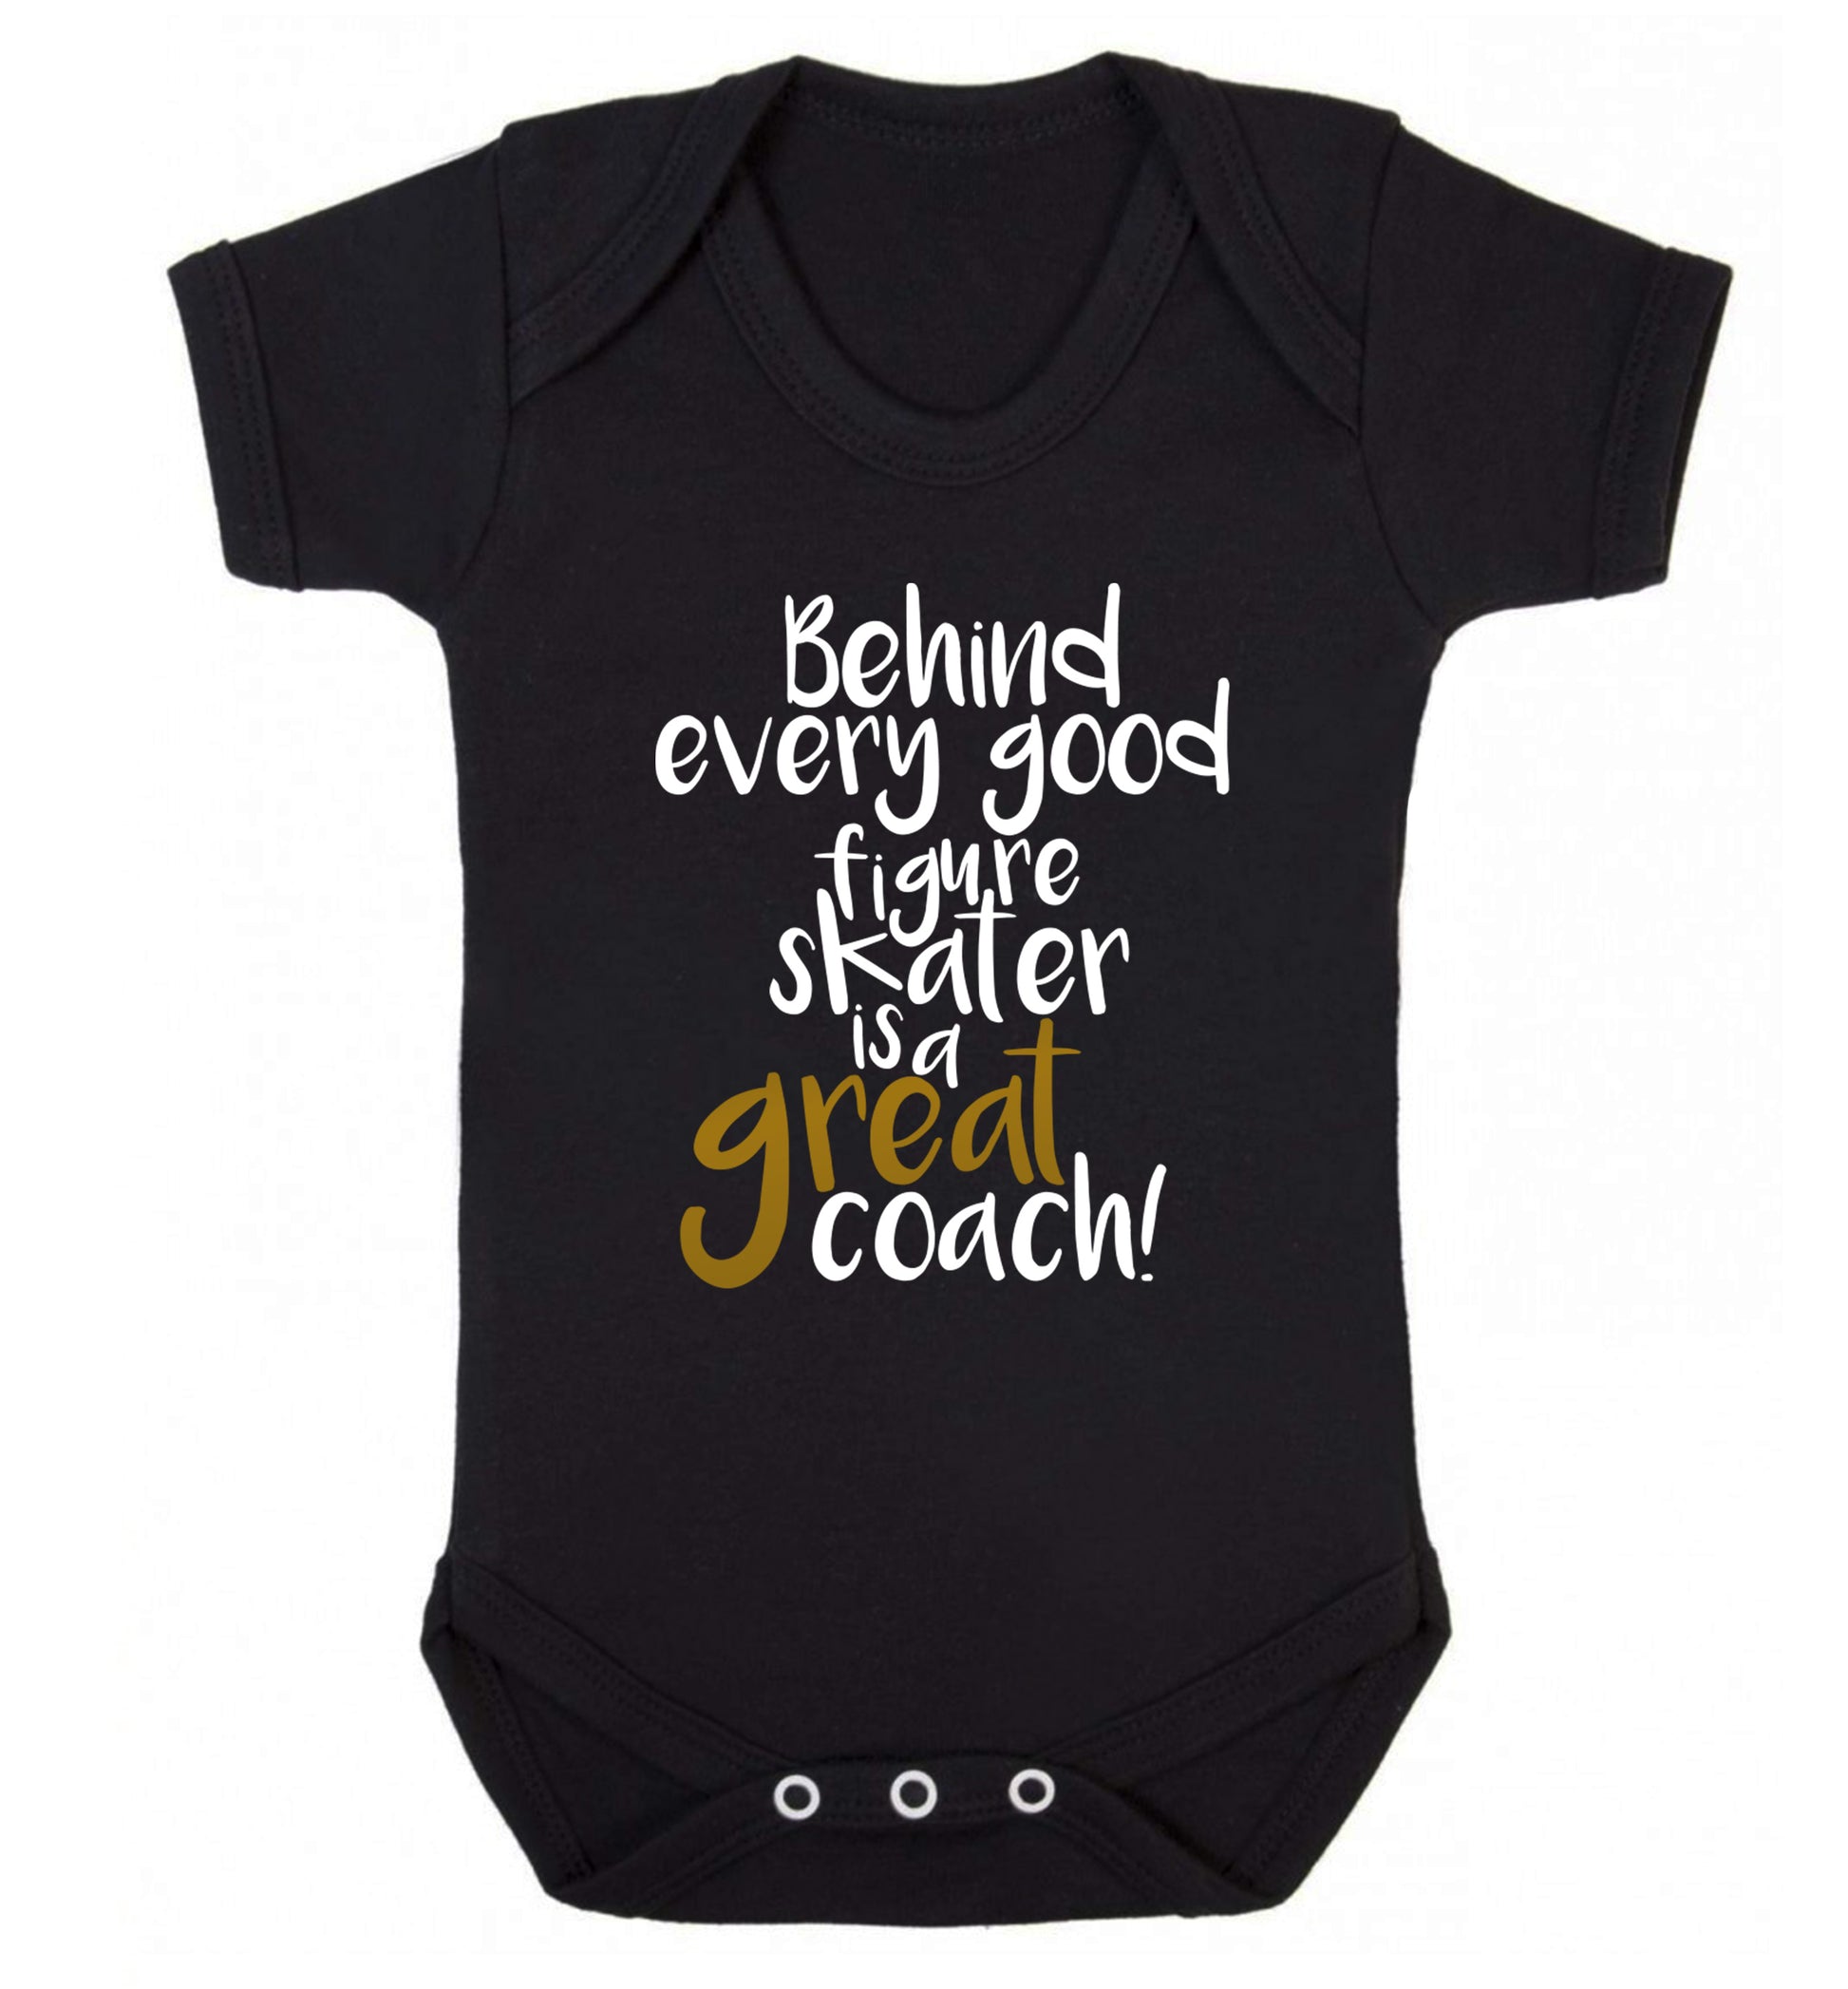 Behind every good figure skater is a great coach Baby Vest black 18-24 months